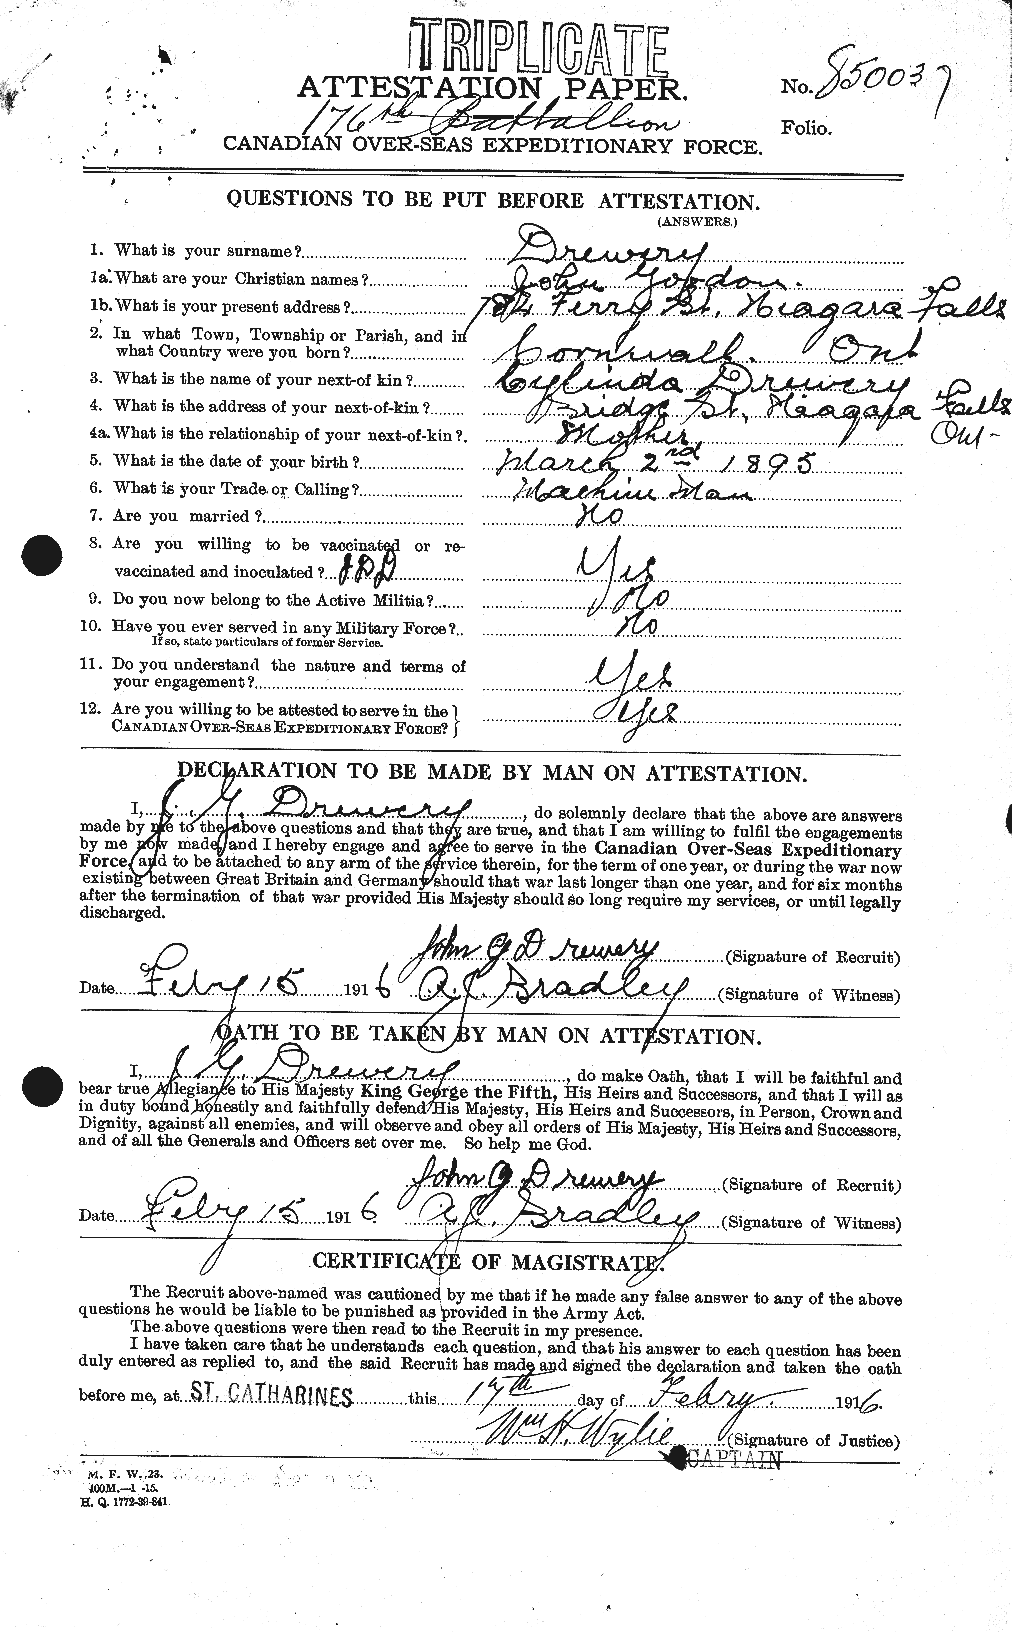 Personnel Records of the First World War - CEF 298846a